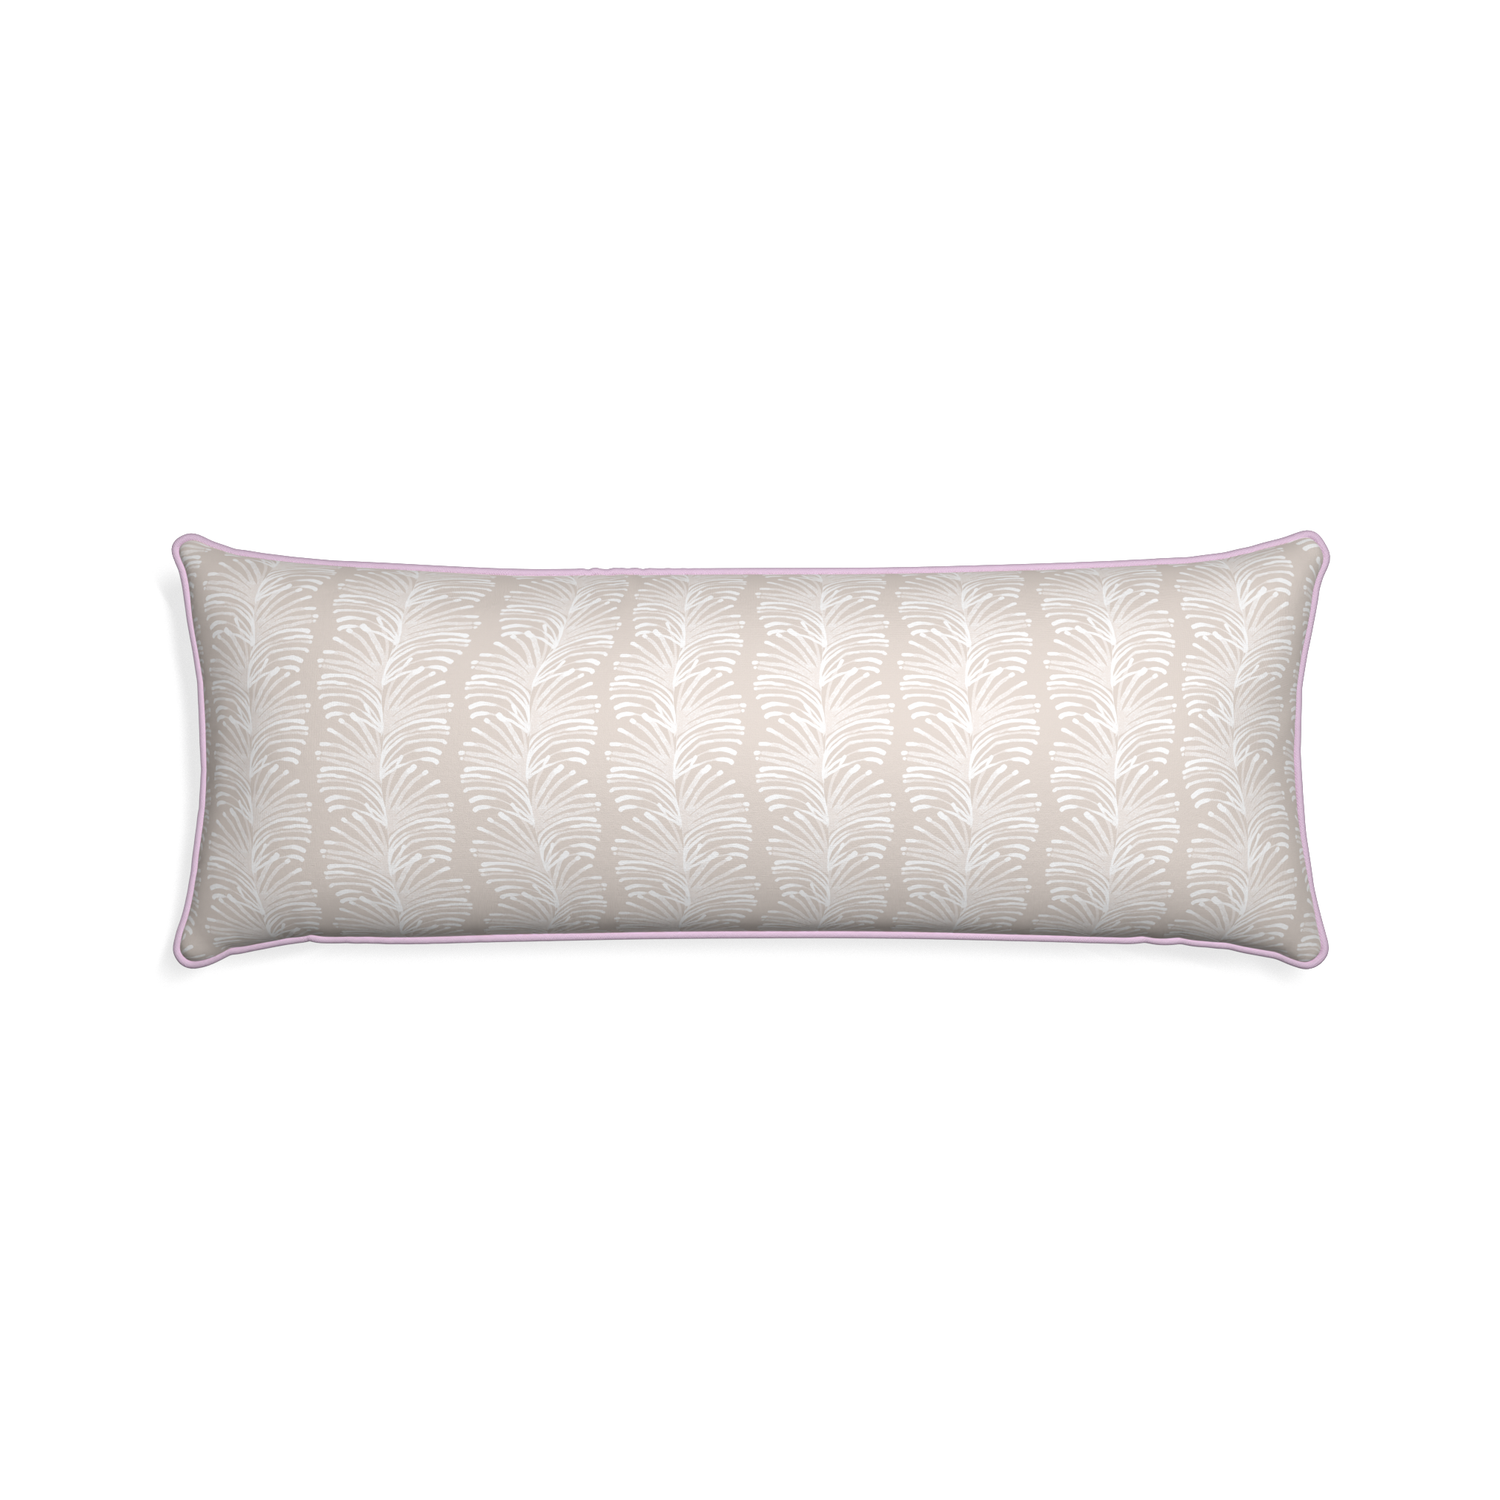 Xl-lumbar emma sand custom sand colored botanical stripepillow with l piping on white background